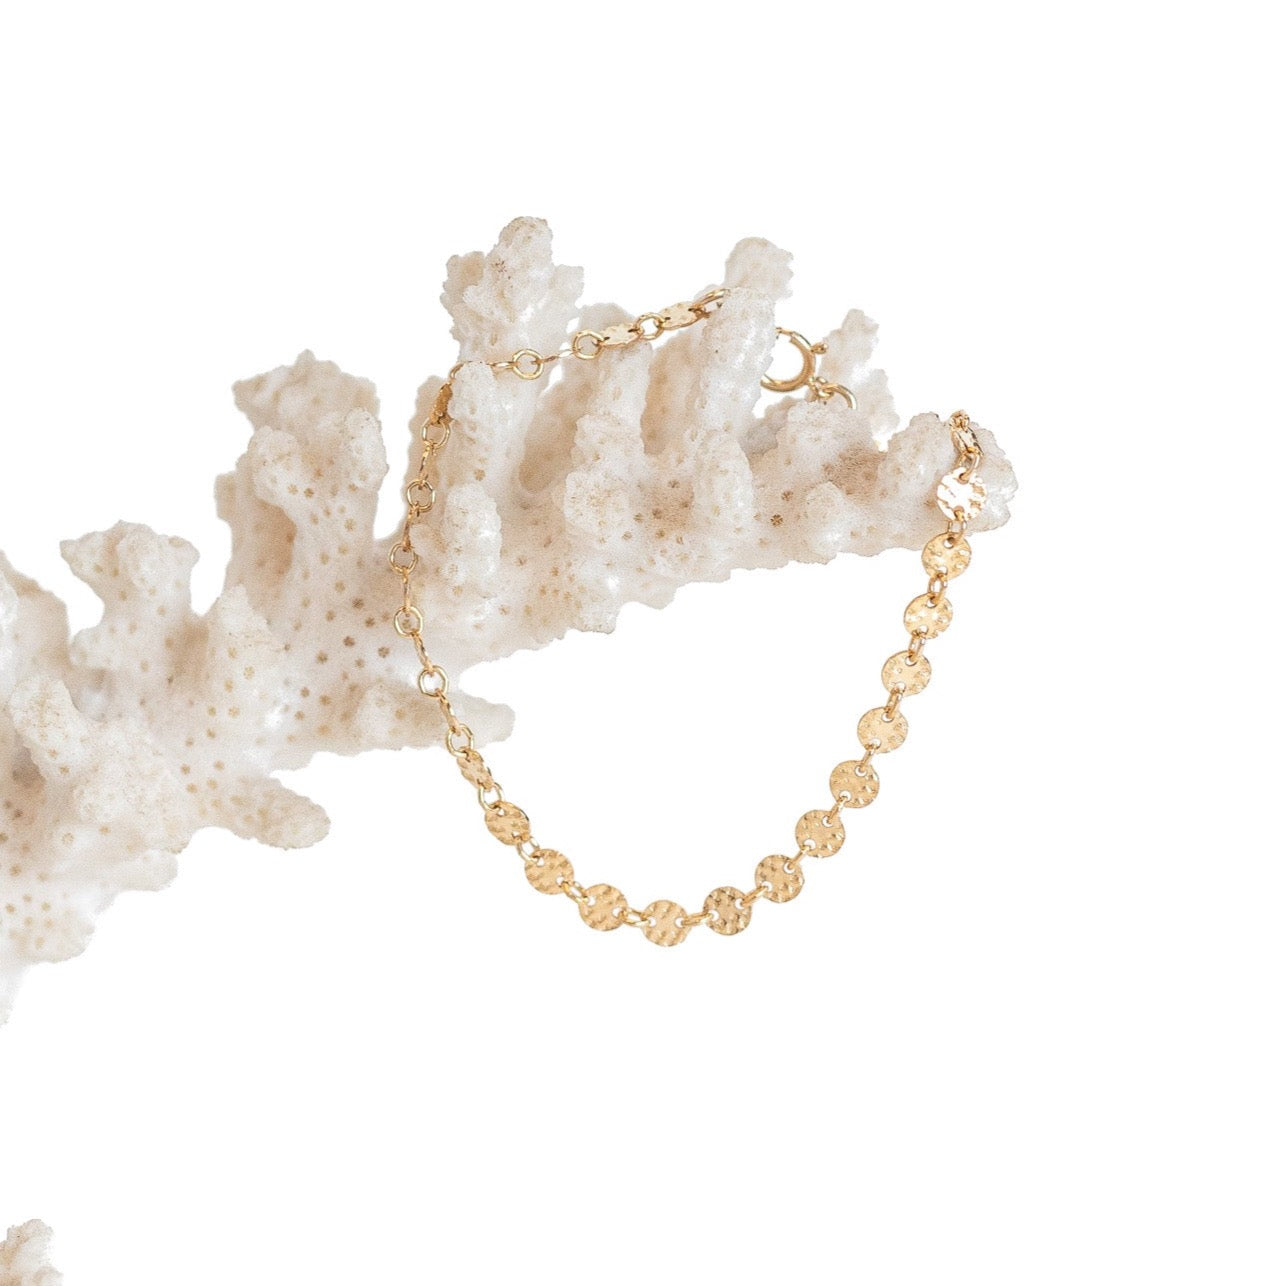 Dainty gold filled disk chain bracelet. Shown on a piece of coral. 